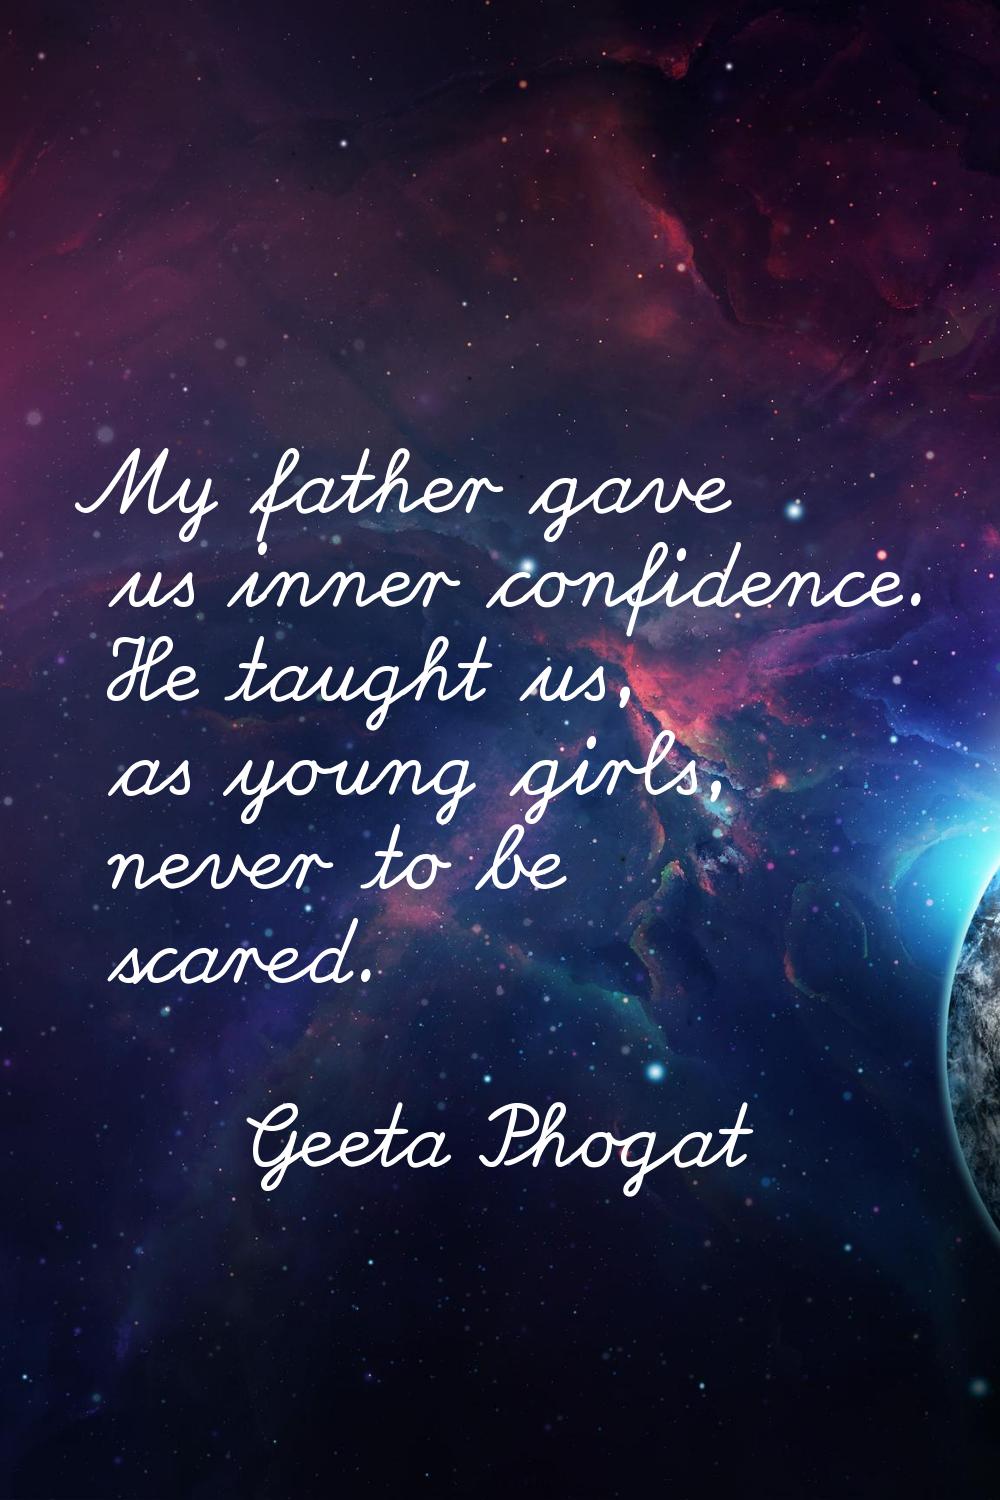 My father gave us inner confidence. He taught us, as young girls, never to be scared.